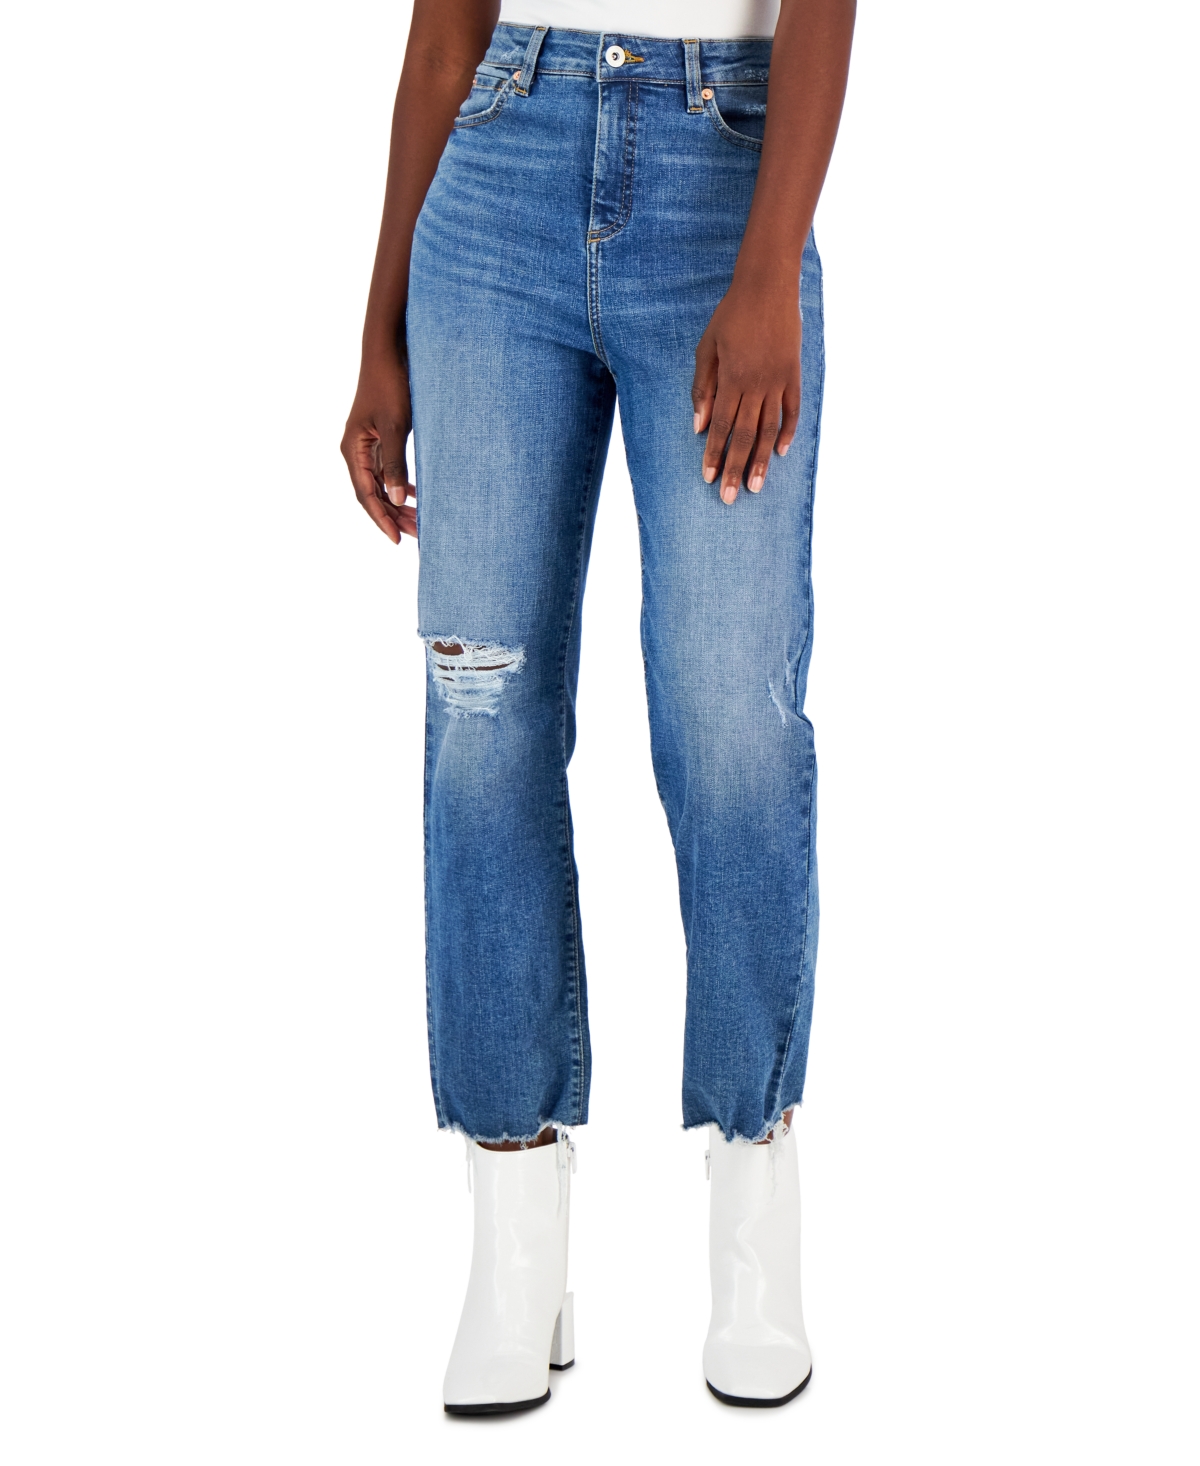  Inc International Concepts Women's High-Rise Distressed Straight-Leg Jeans, Created for Macy's